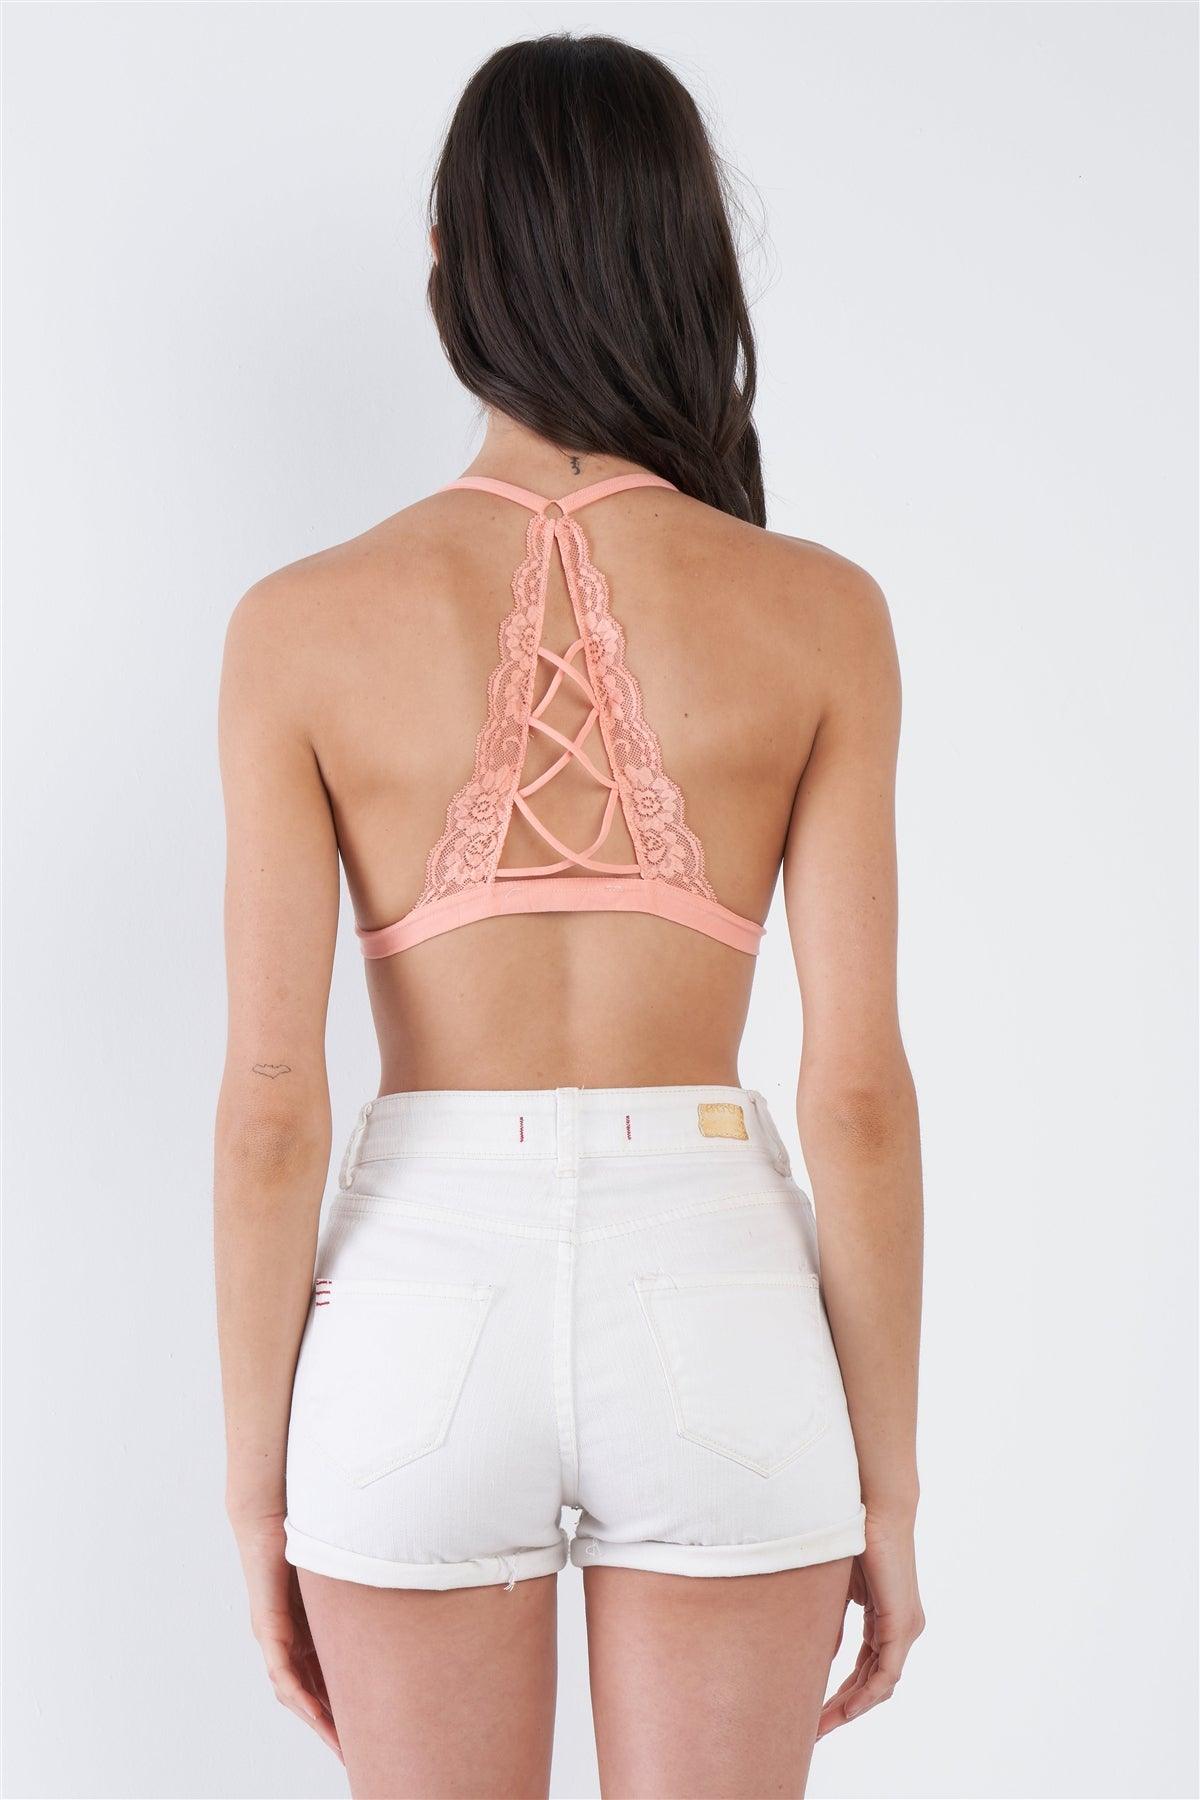 Blush Pink Cut Out Lace Up Raserback Floral Lace Bralette   /3-2-1